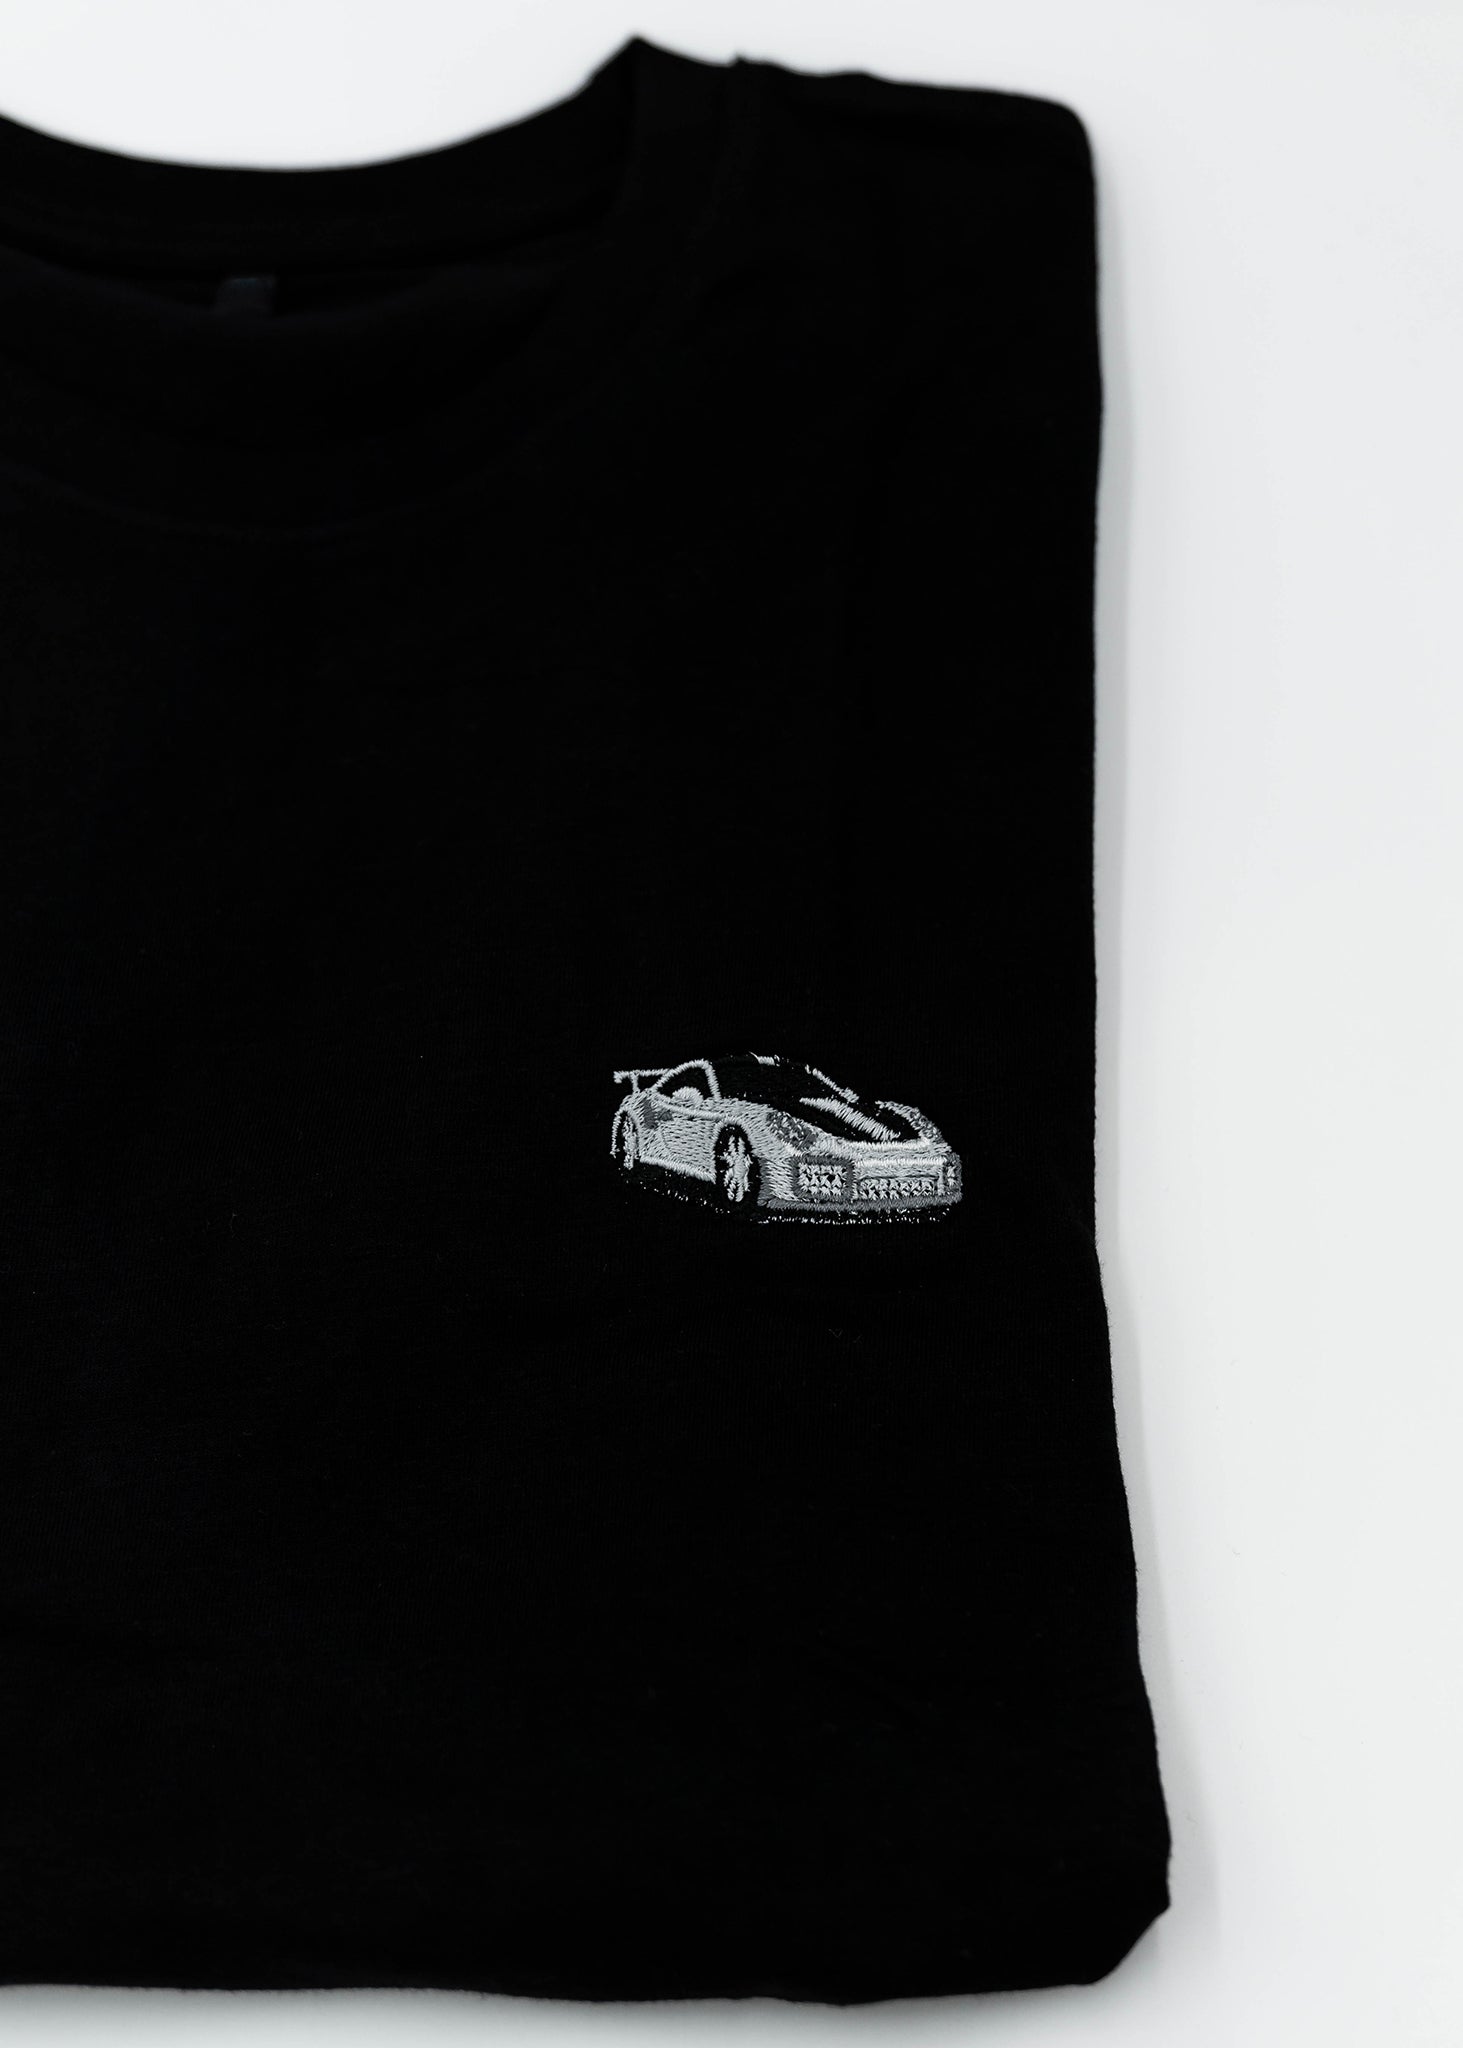 Close up of an embroidered 991.2 GT2 RS on a black men's cotton t-shirt. Photo shows the high quality detailed embroidery of a white, silver, and carbon fiber GT2 RS. Fabric composition of the shirt is polyester and cotton. The material is very soft, stretchy, and non-transparent. The style of this t-shirt is short sleeve, round bottom, crewneck, with embroidery on the left chest.